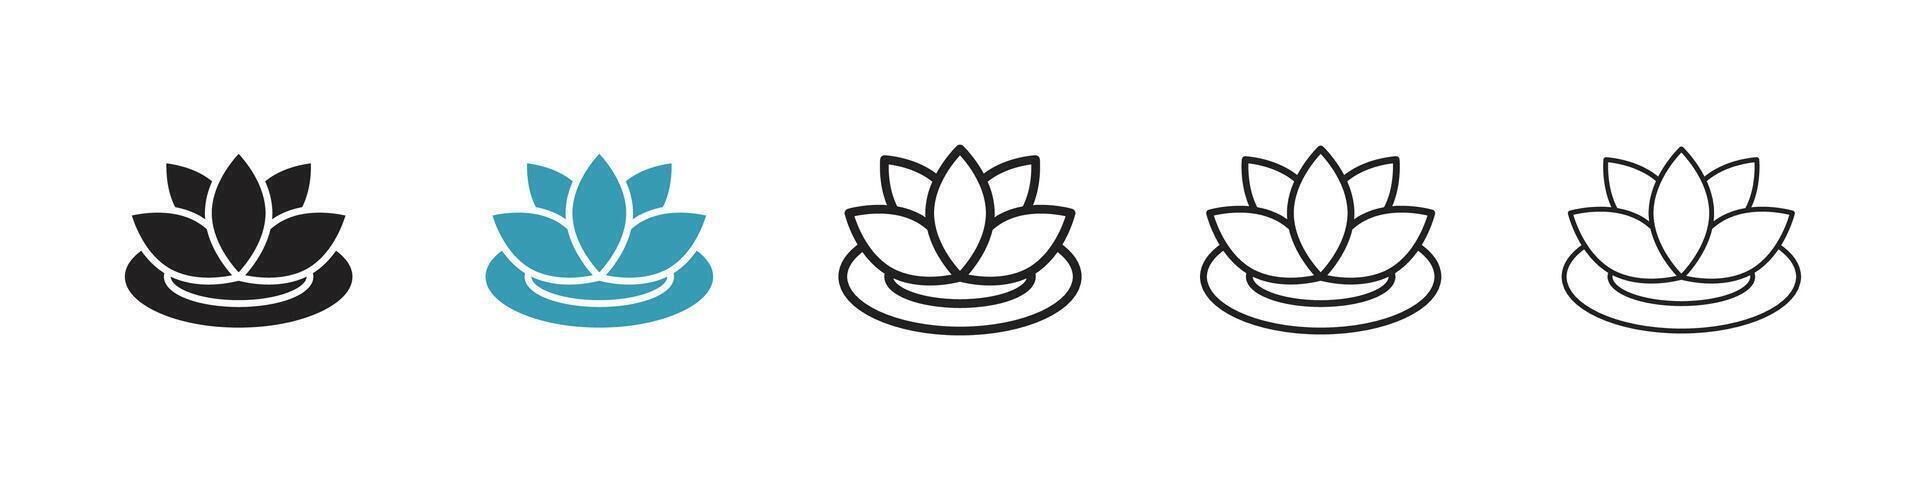 Water lily icon vector